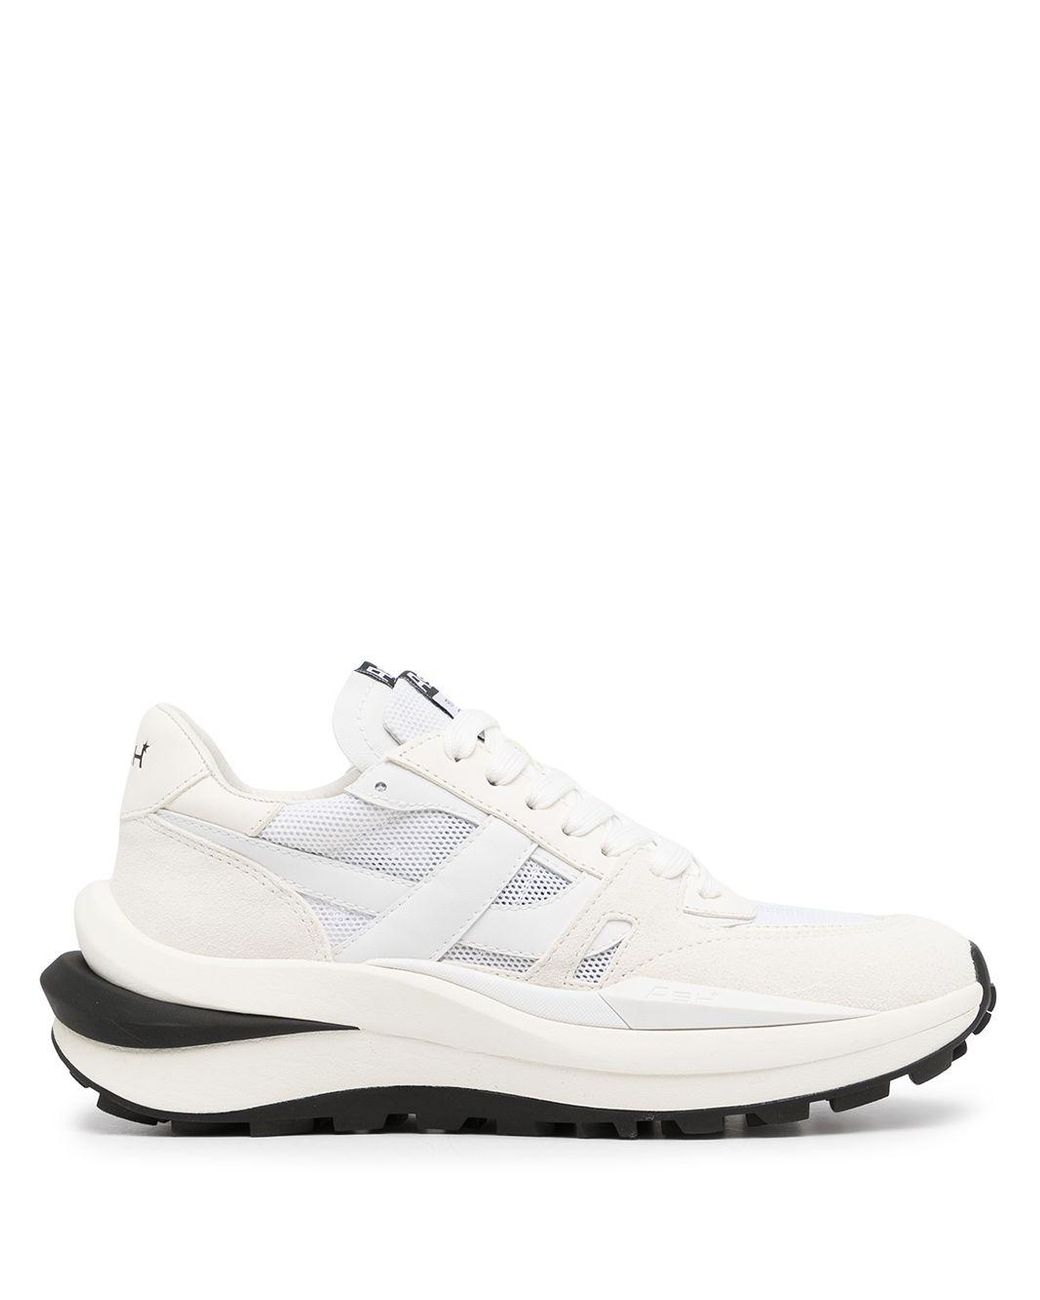 Ash Suede Spider 620-02 Recycled Sneakers in White - Lyst